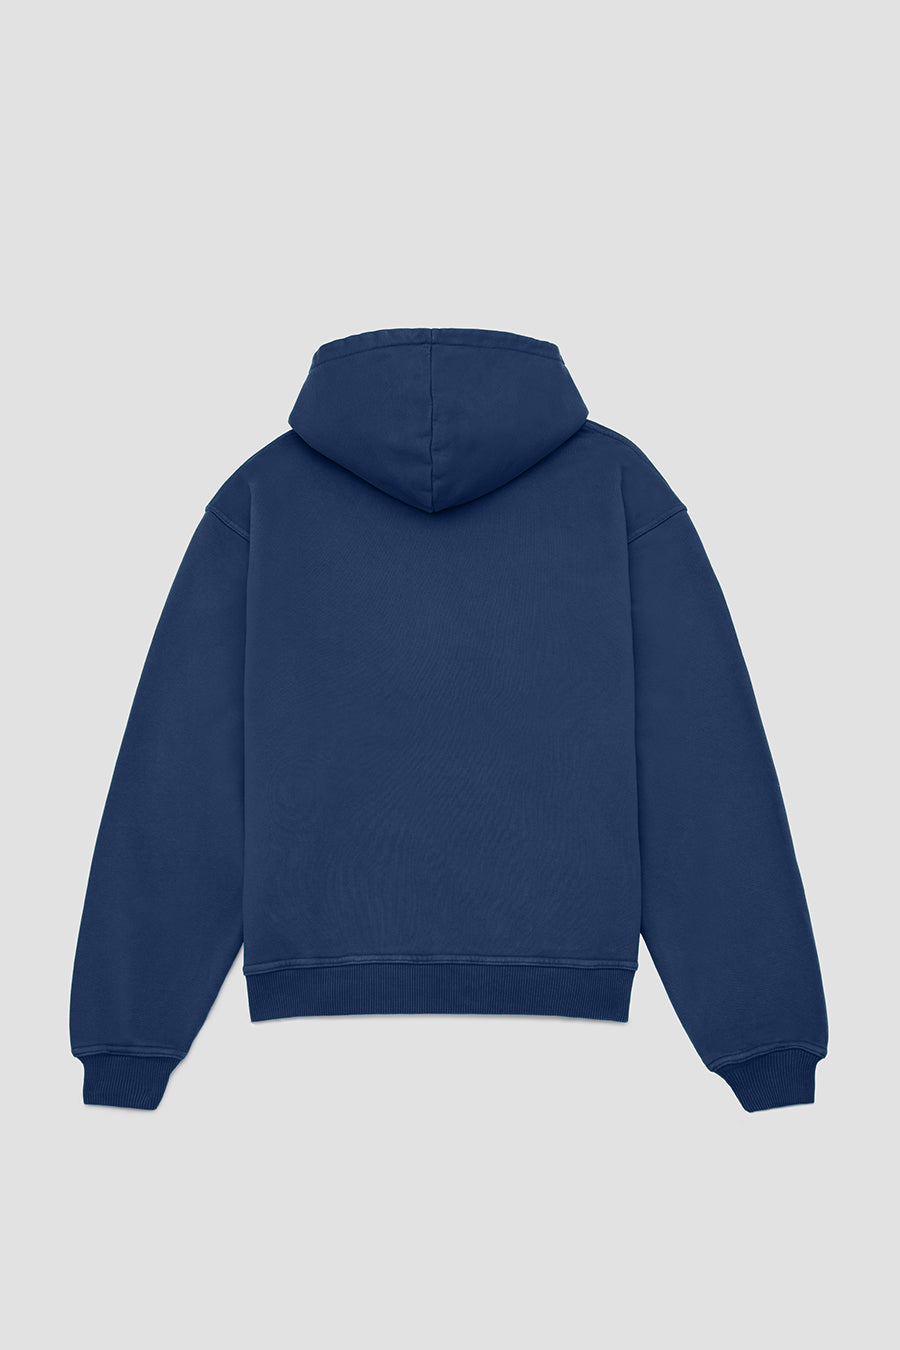 Navy Hoodie - only available in wholesale